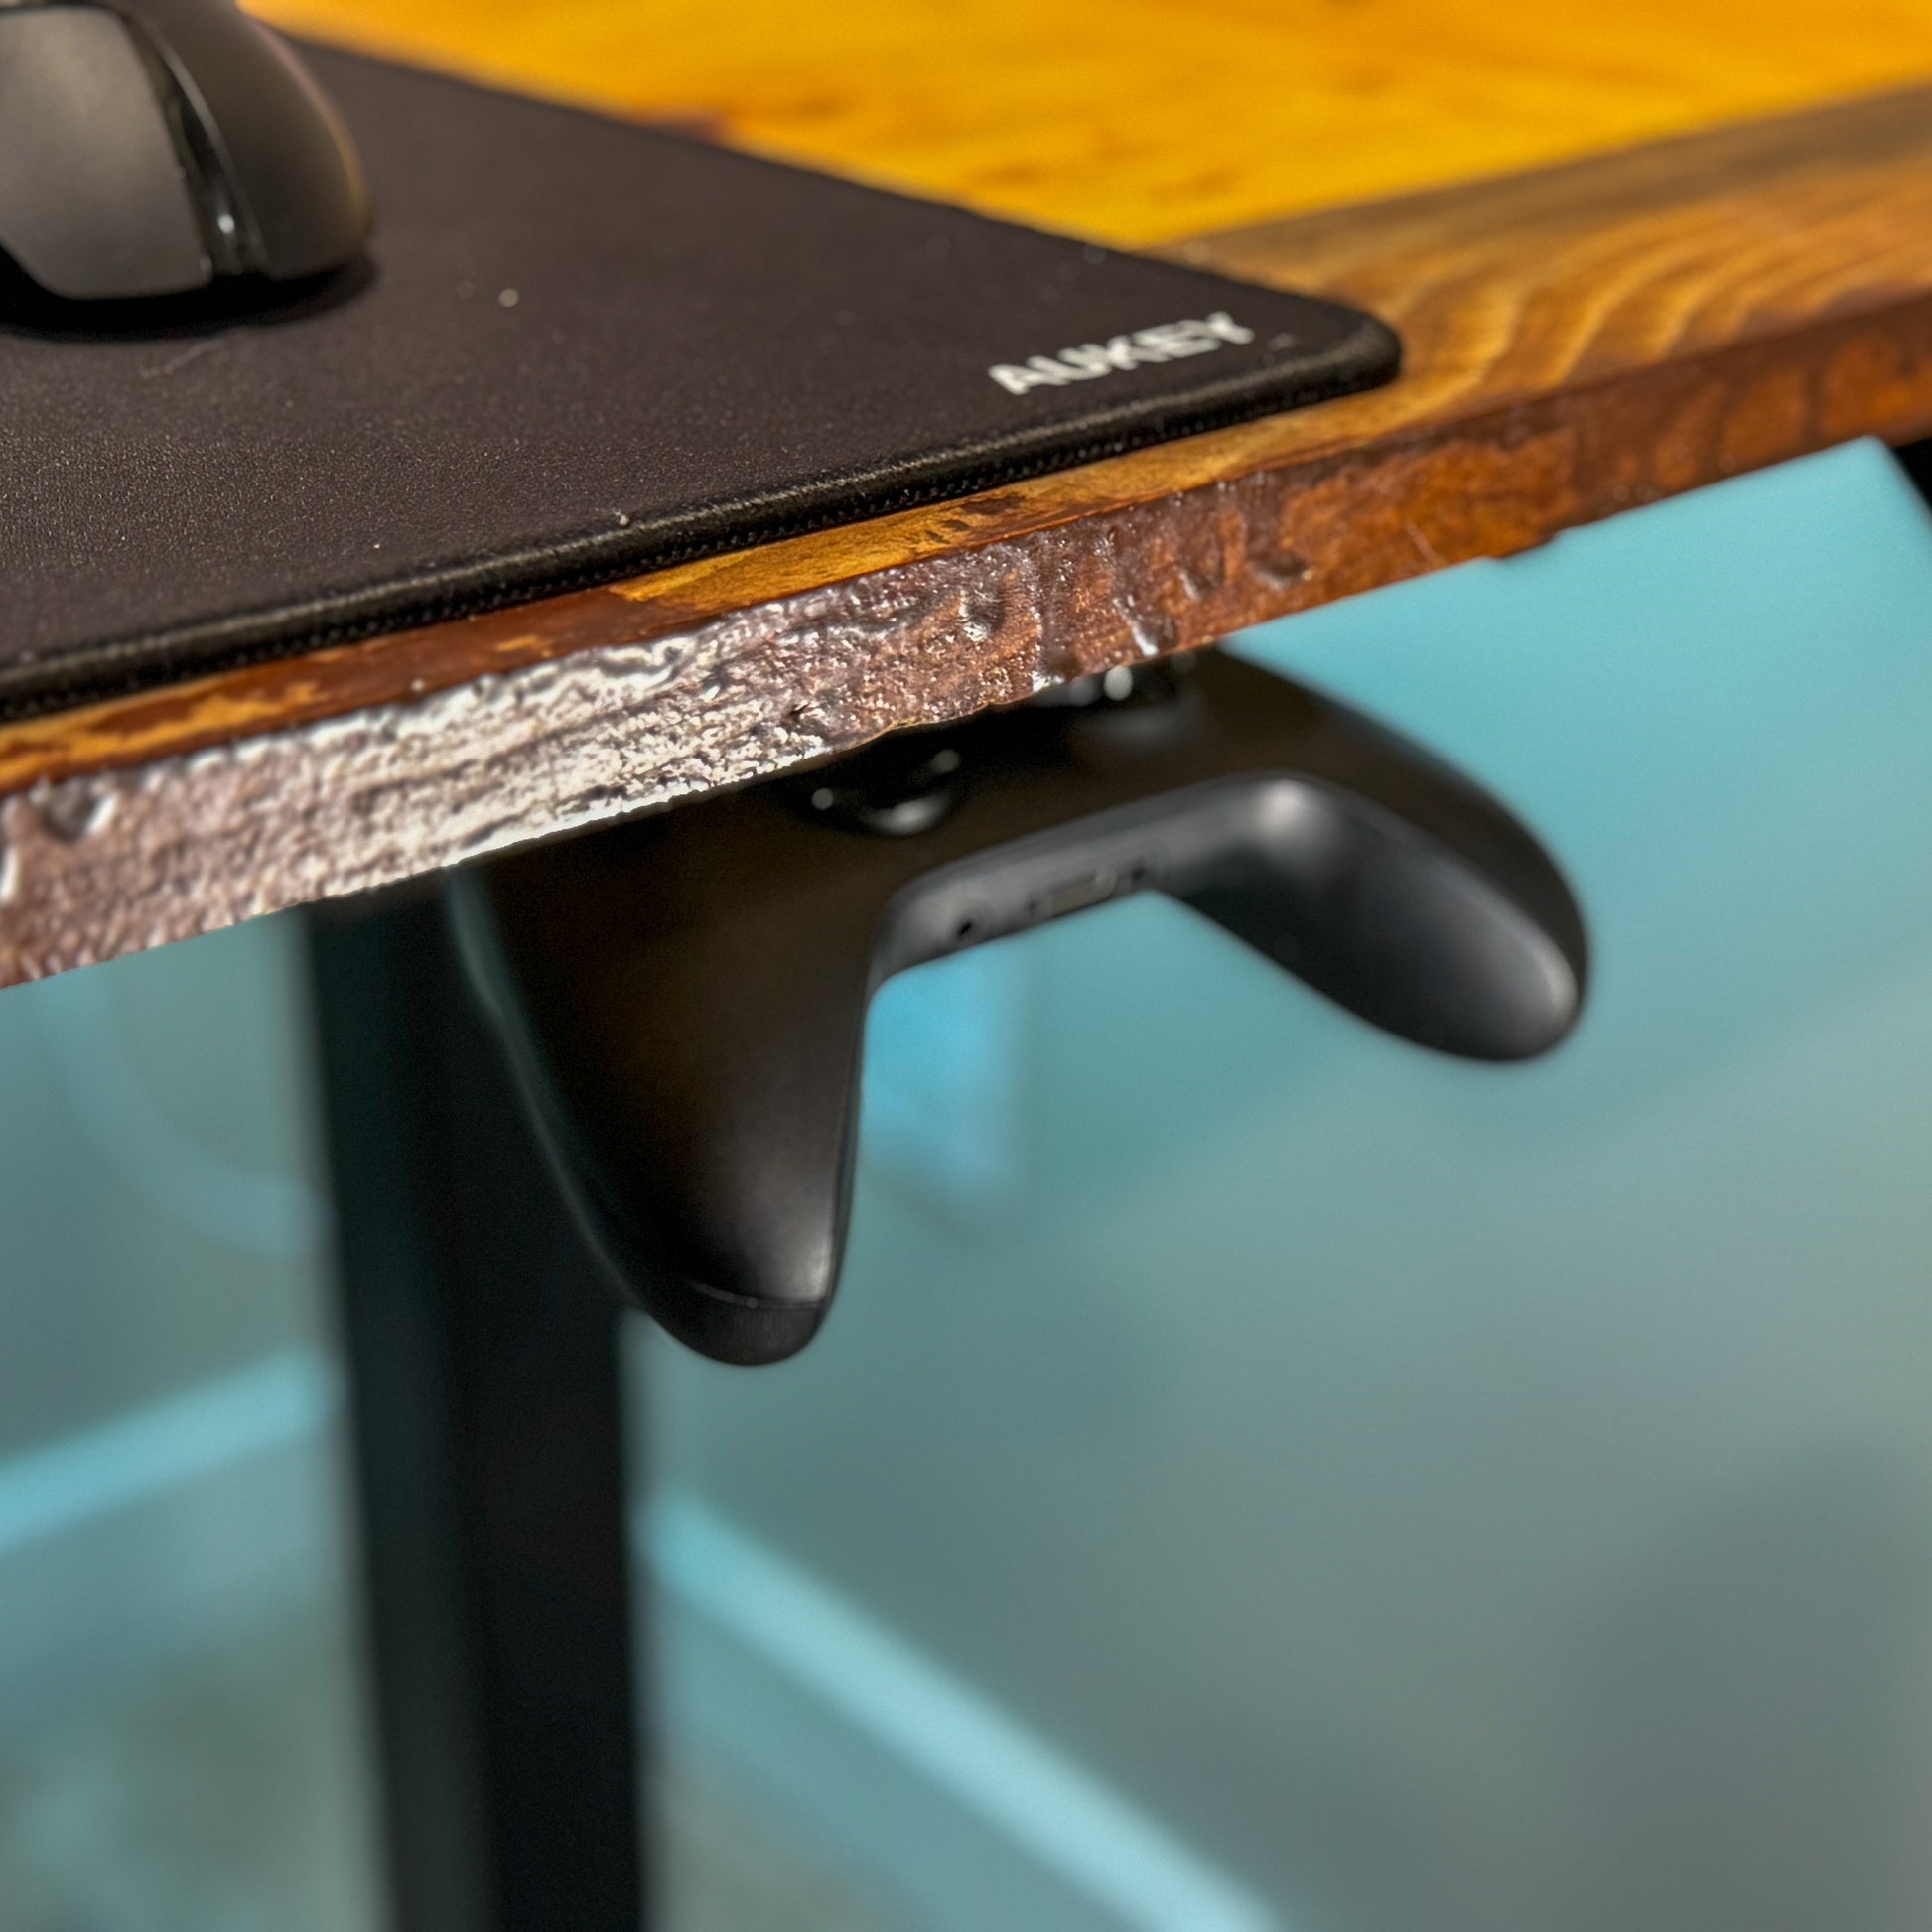 An elevated view of a black xbox controller hanging from an under desk mounted controller holder.